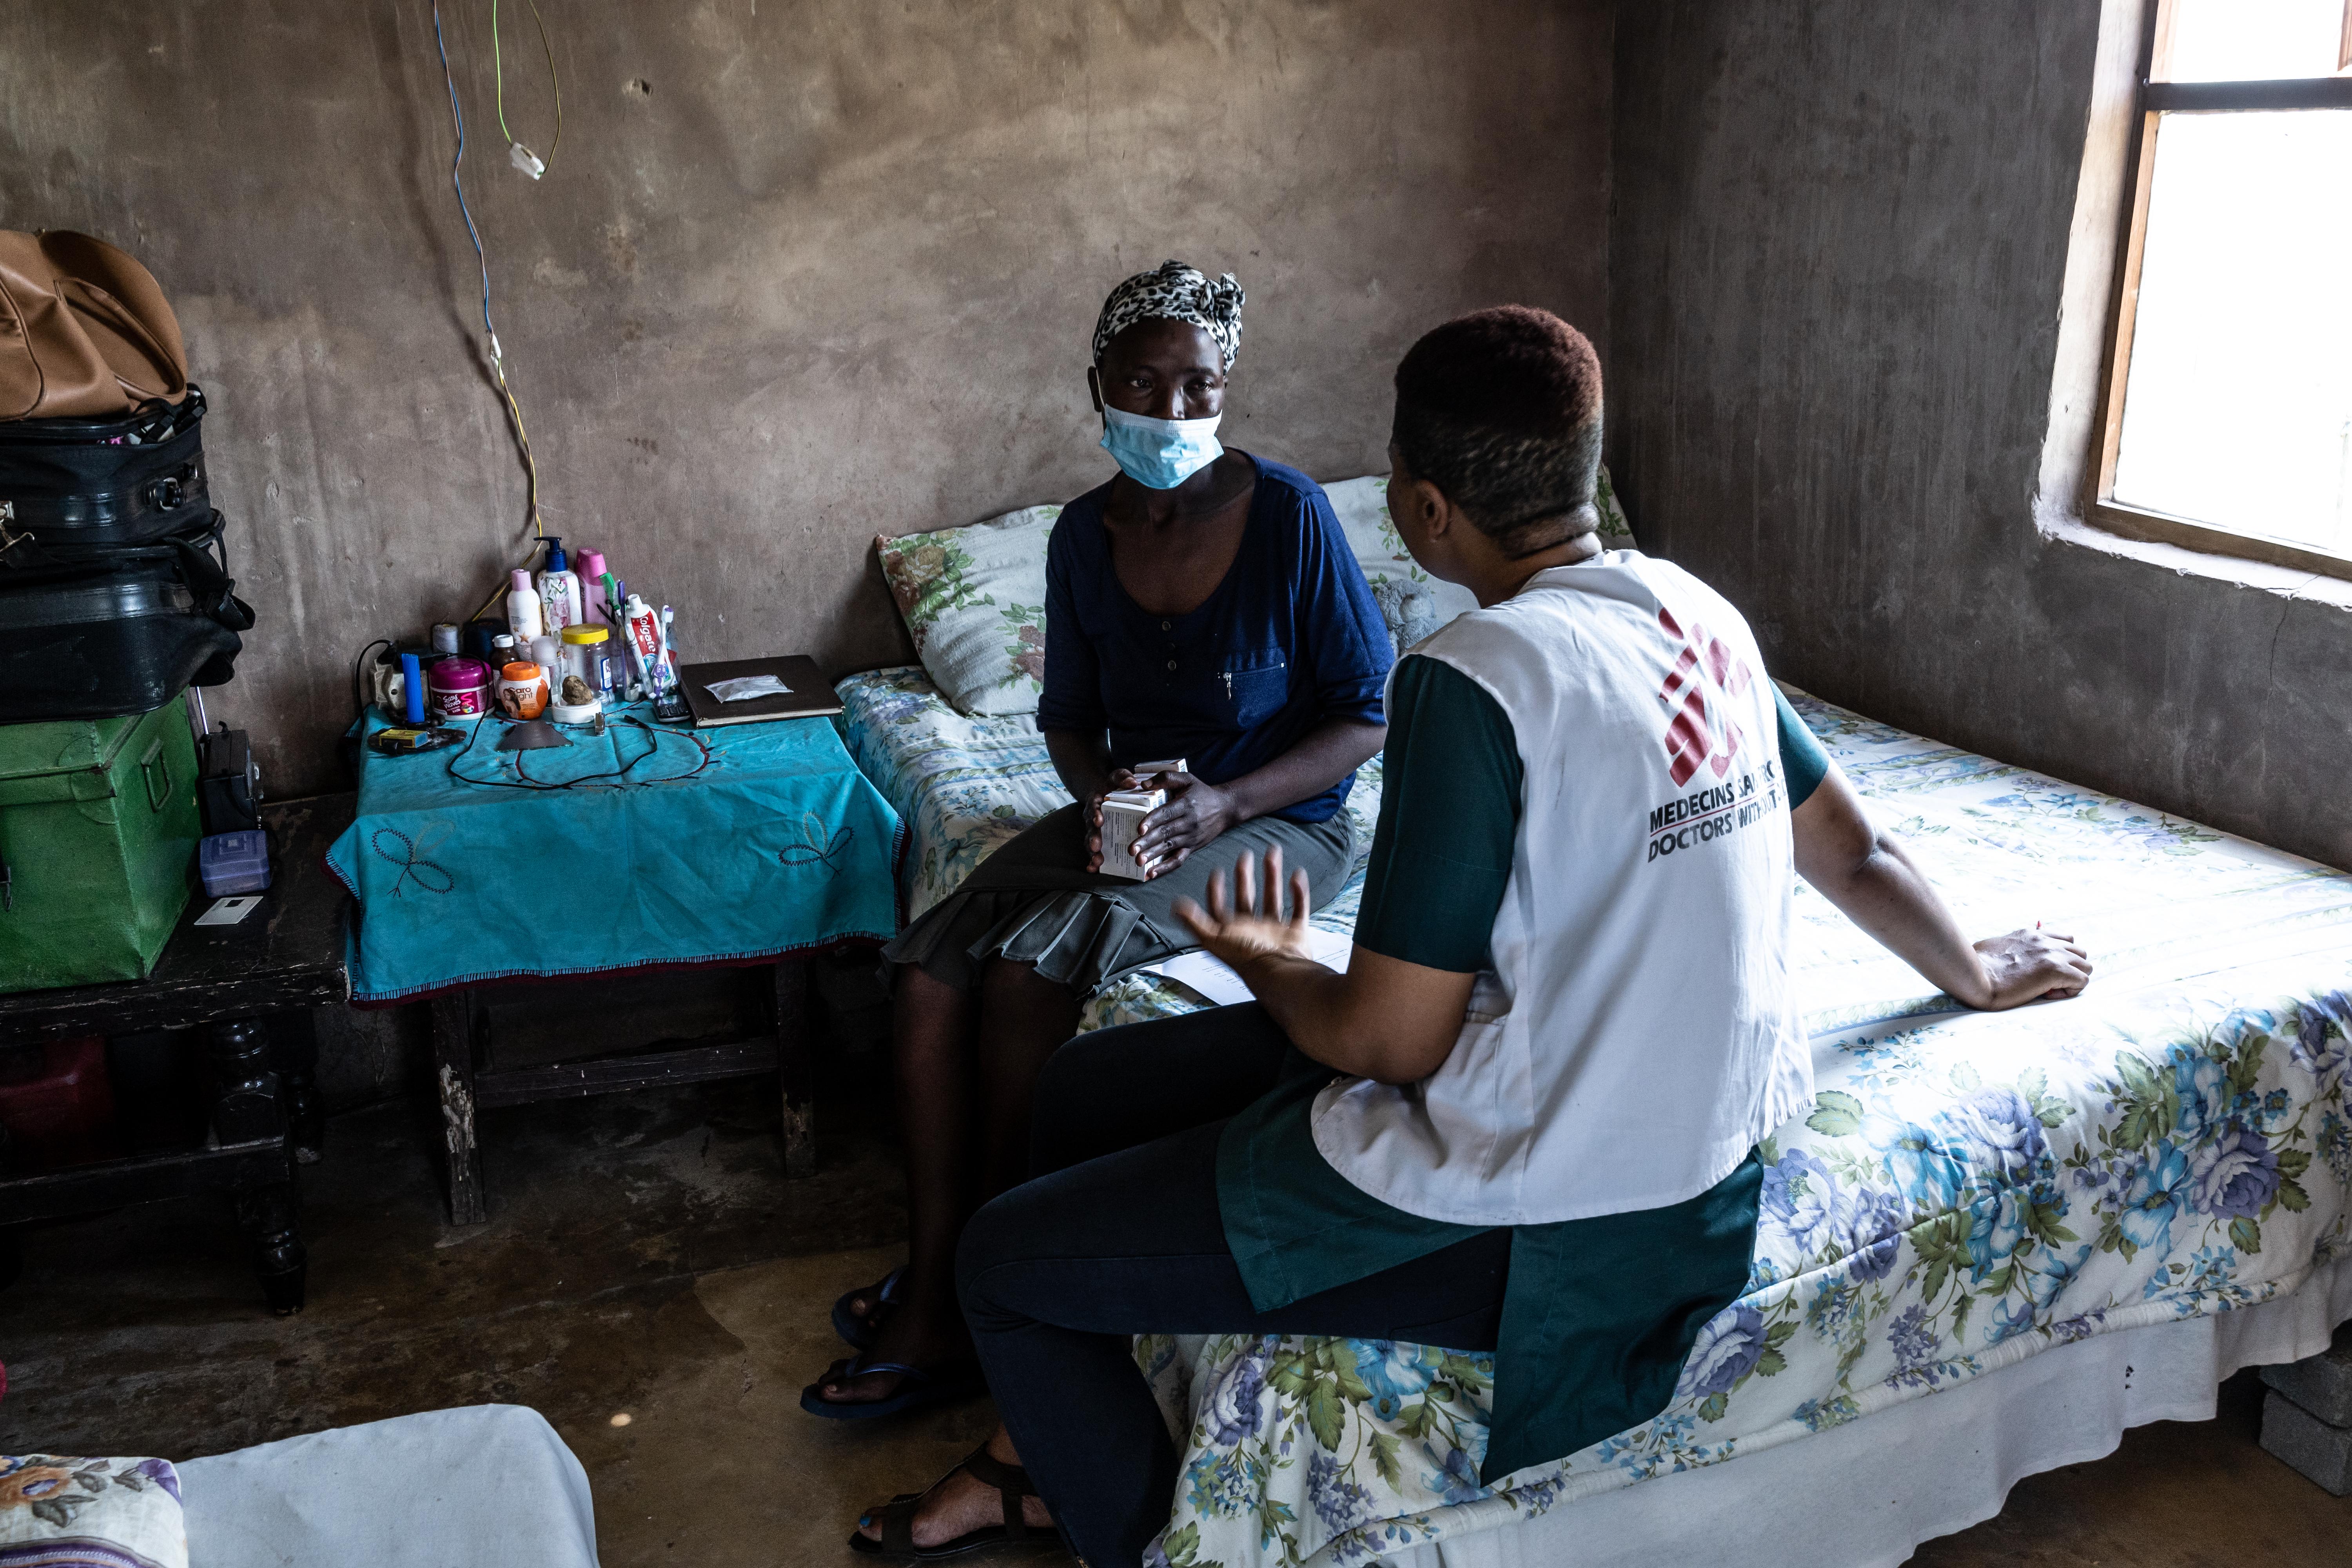 Phenduka Mtshali, a patient with Drug Resistant Tuberculosis (DR-TB), is seen in her home in Mbongolwane, South Africa speaking with MSF fieldworker, Celiwe Dlamini. 